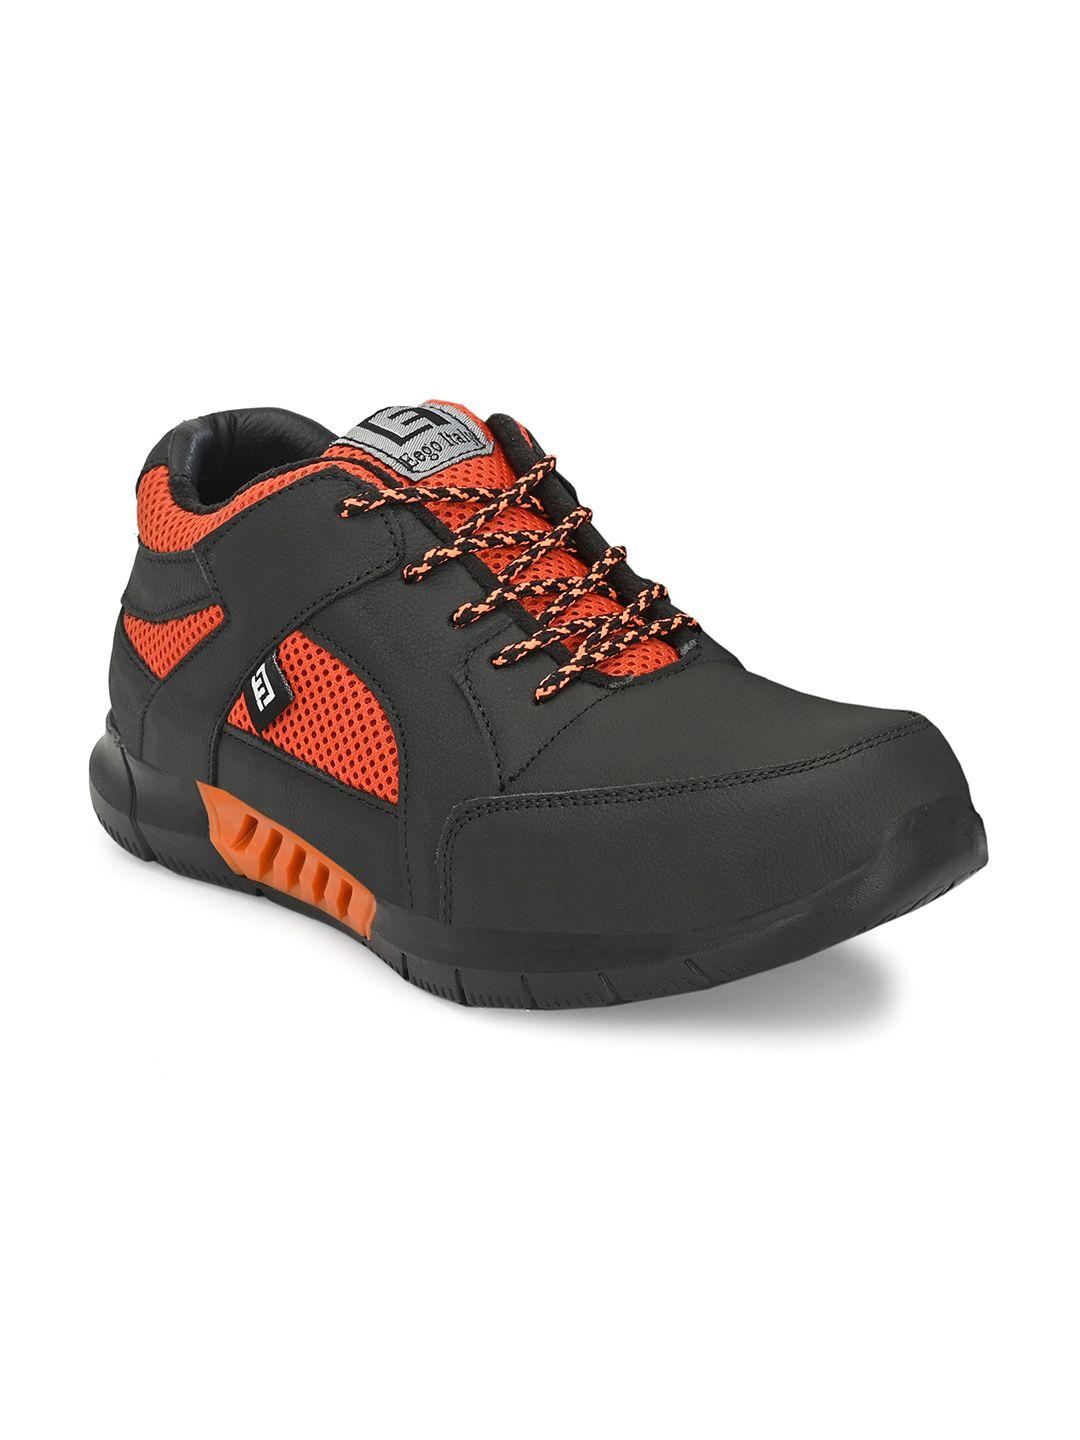 eego italy men leather trekking non-marking shoes